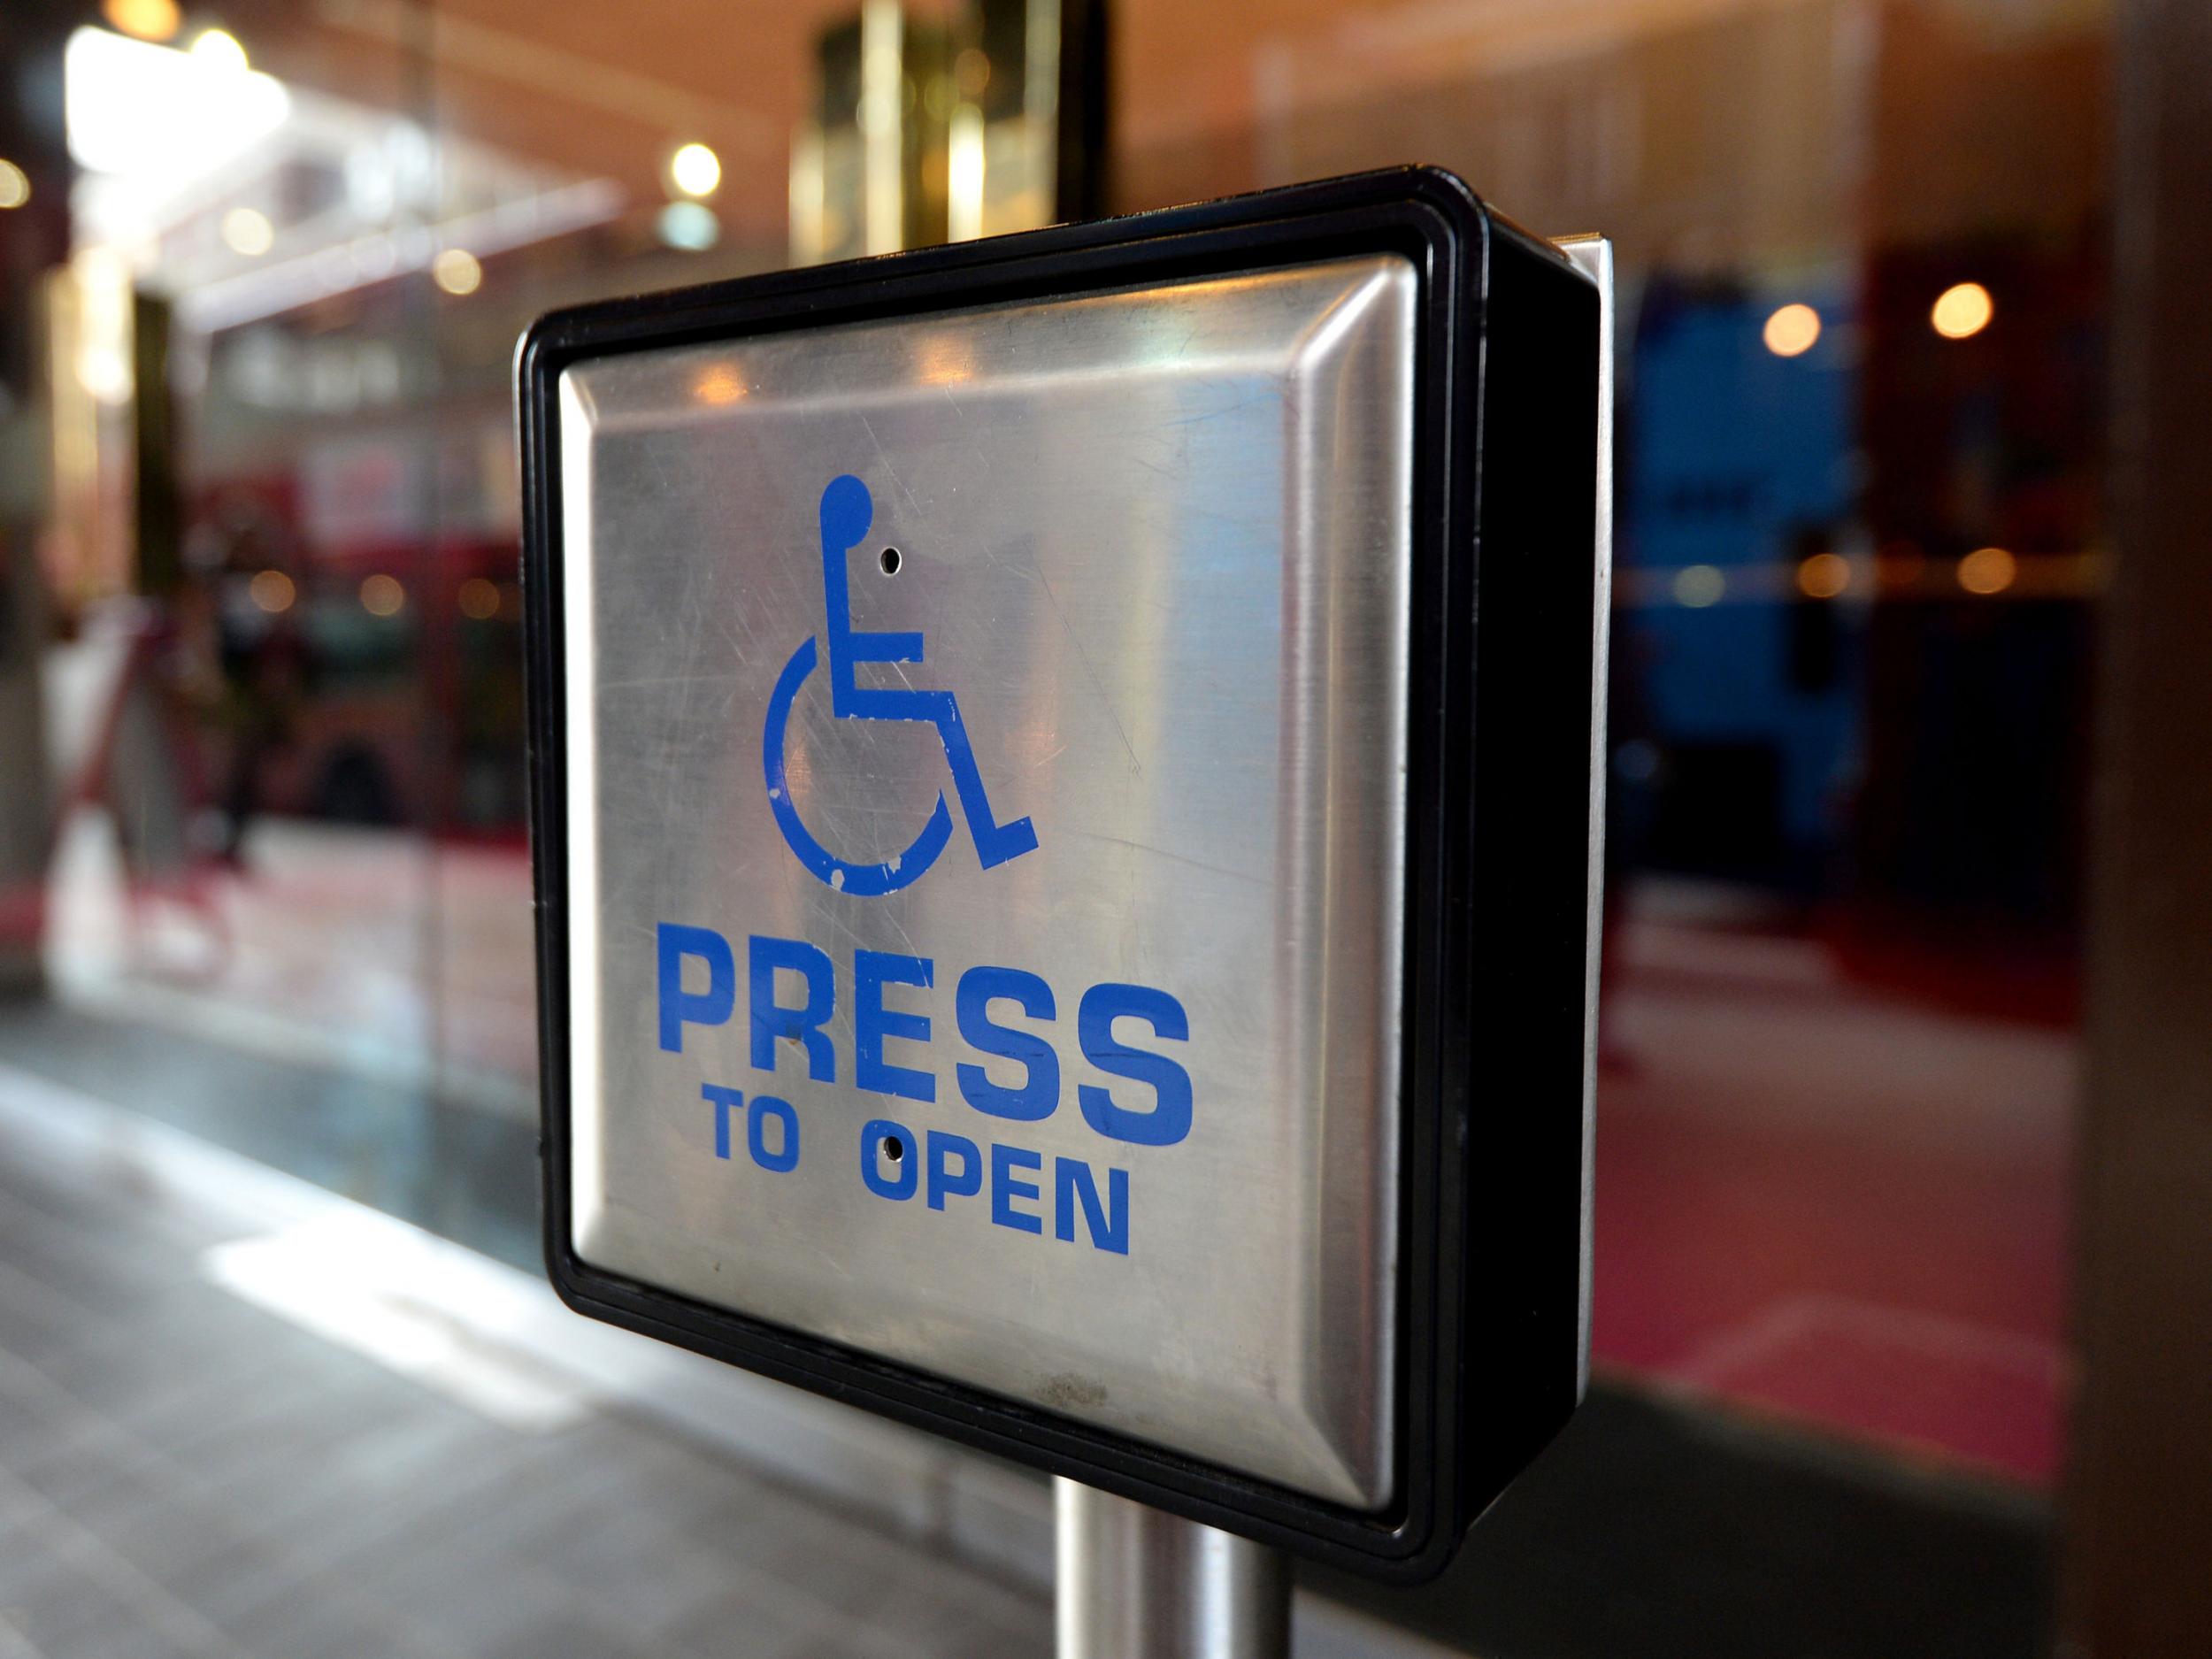 The UK is in breach of the Convention on the Rights of Disabled People